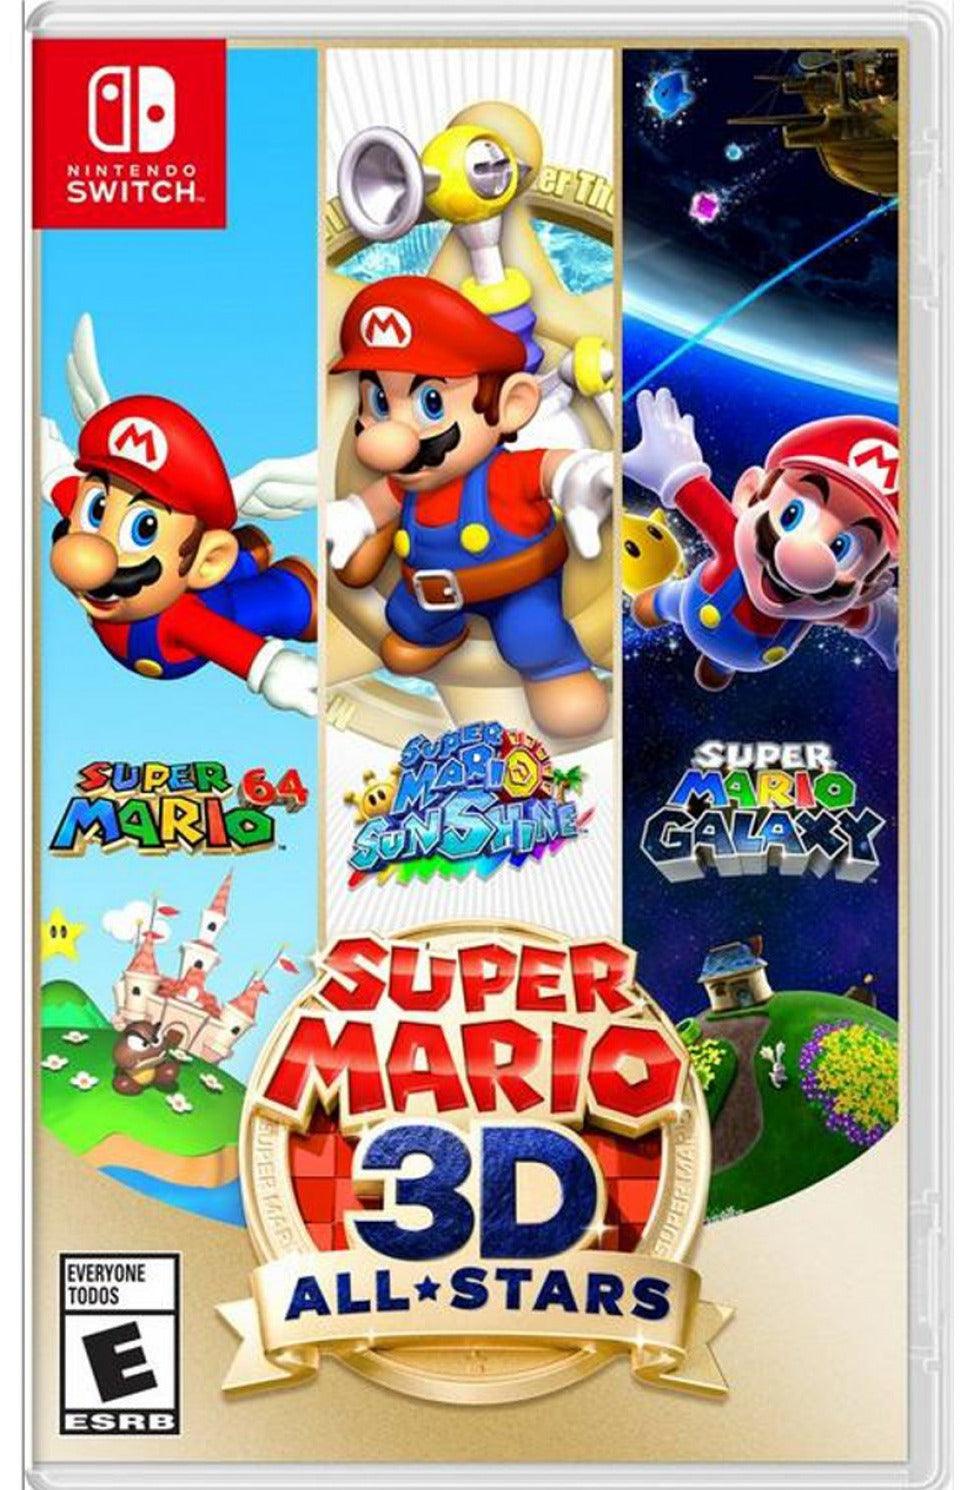 NSW SUPER MARIO 3D ALL STARS (US) (ENG 